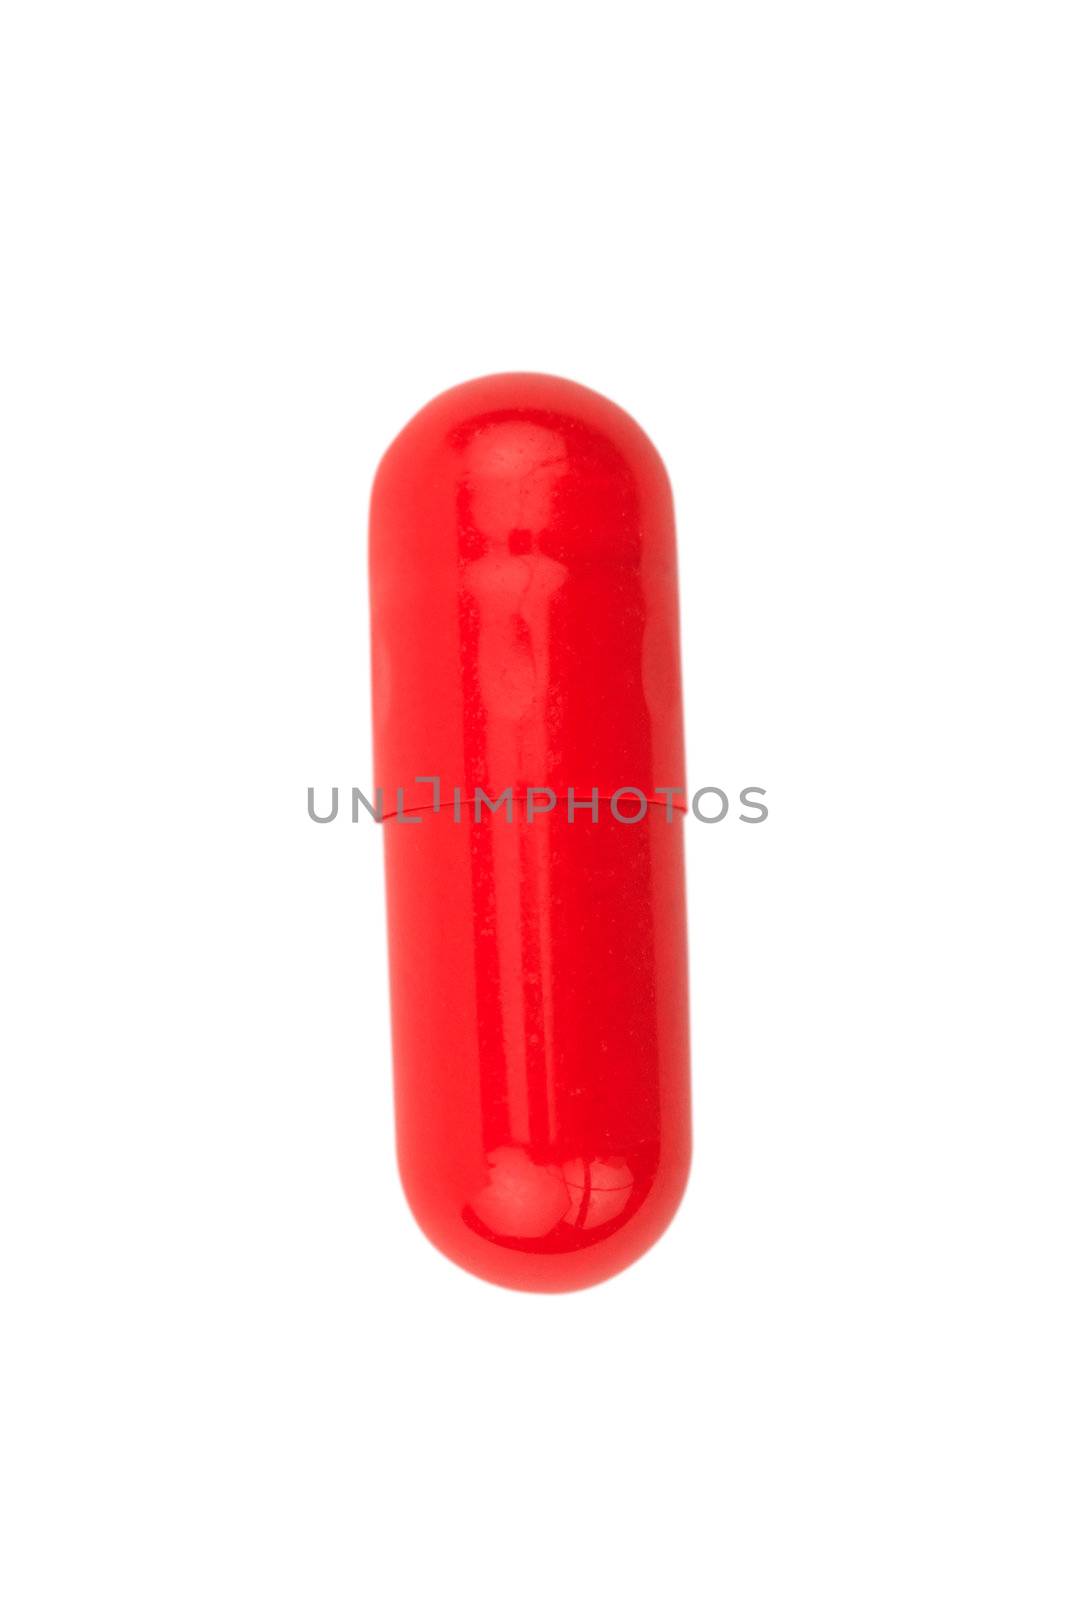 Red capsule pill isolated on white with clipping path included. 